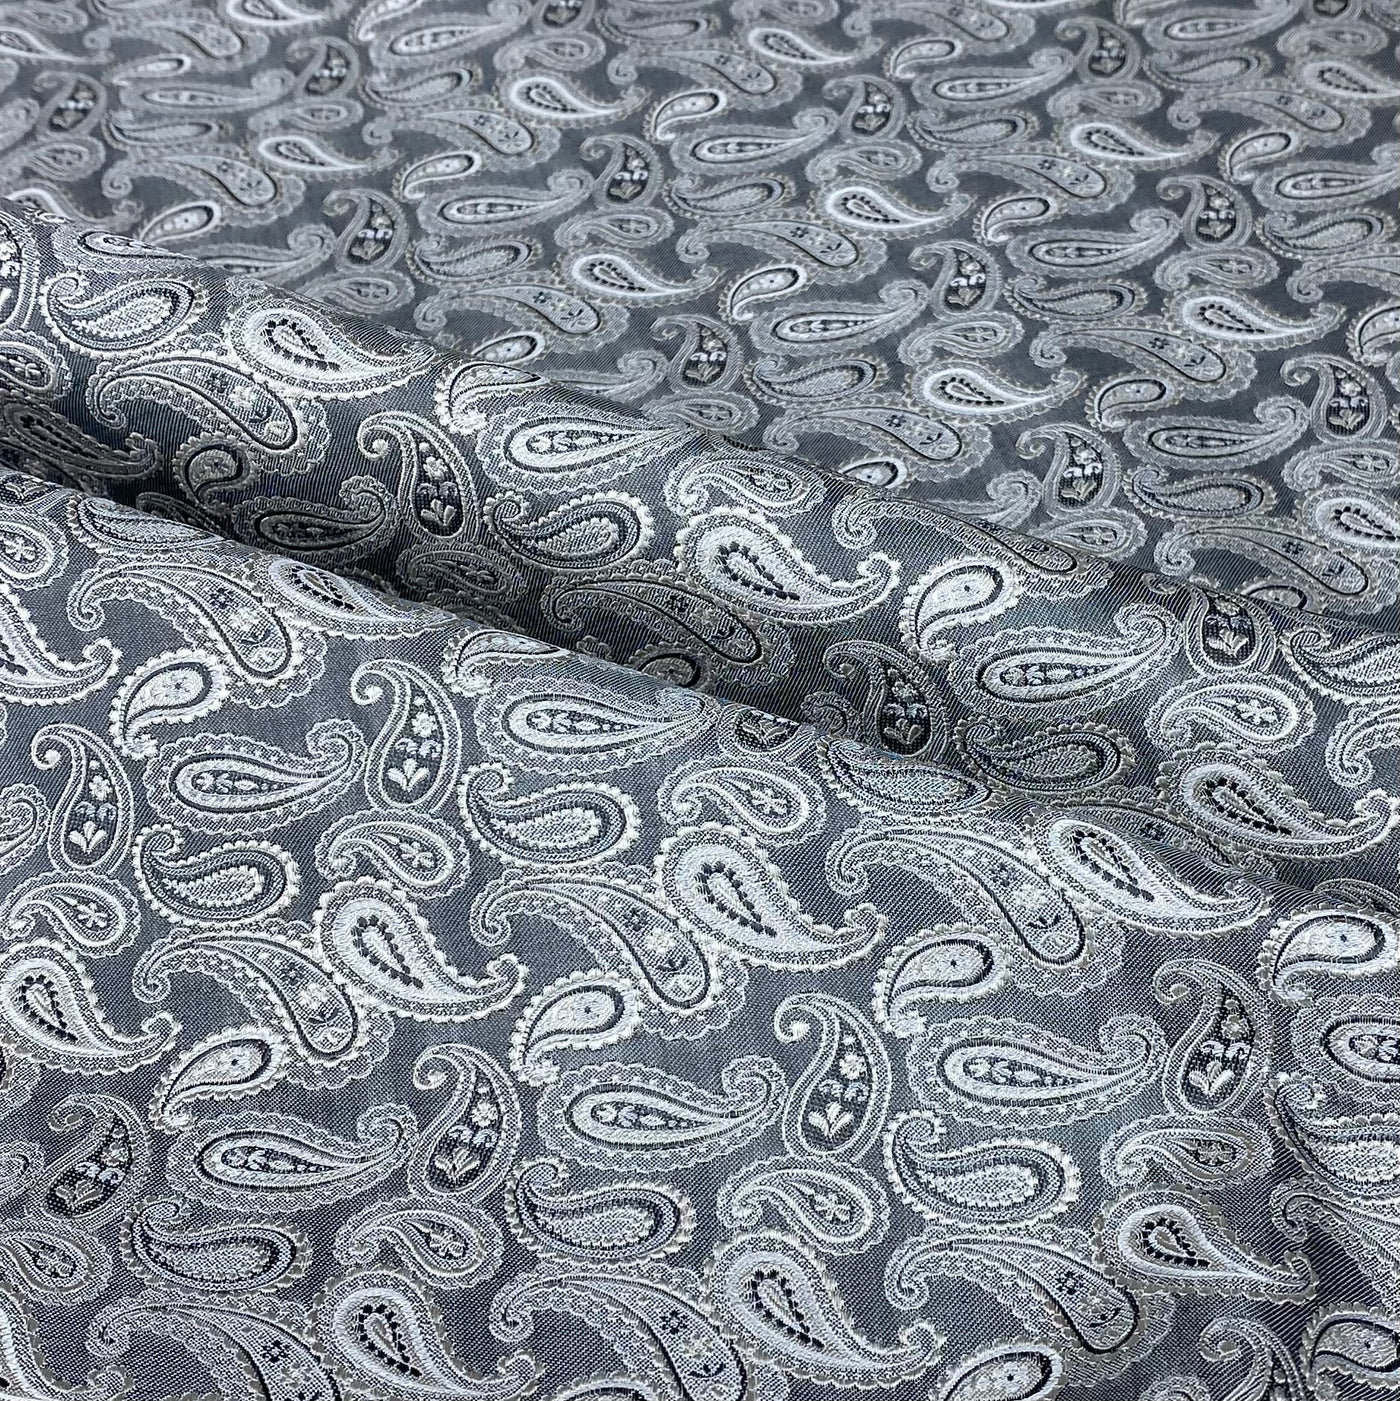 Paisley Silk/Polyester Jacquard - Grey / Beige / White  - Remnant